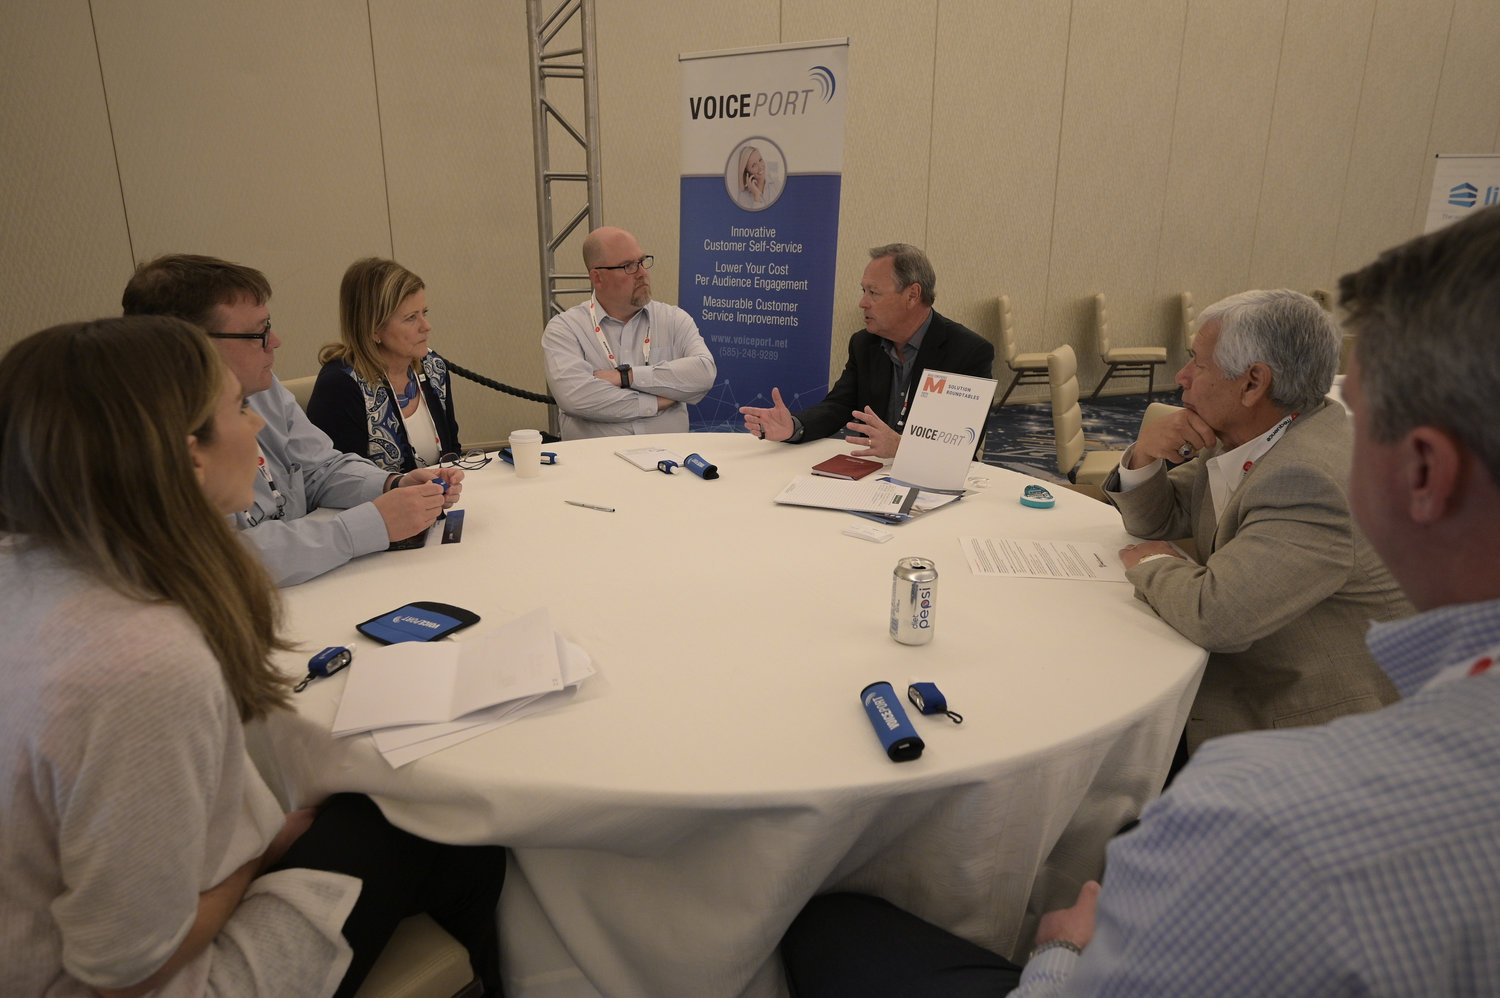 Among the topics at the VoicePort Roundtable: Addressing the different service needs of digital vs print subscribers –- using chat and messaging to reduce costs while improving efficiencies. (Photo by Phelan M. Ebenhack)